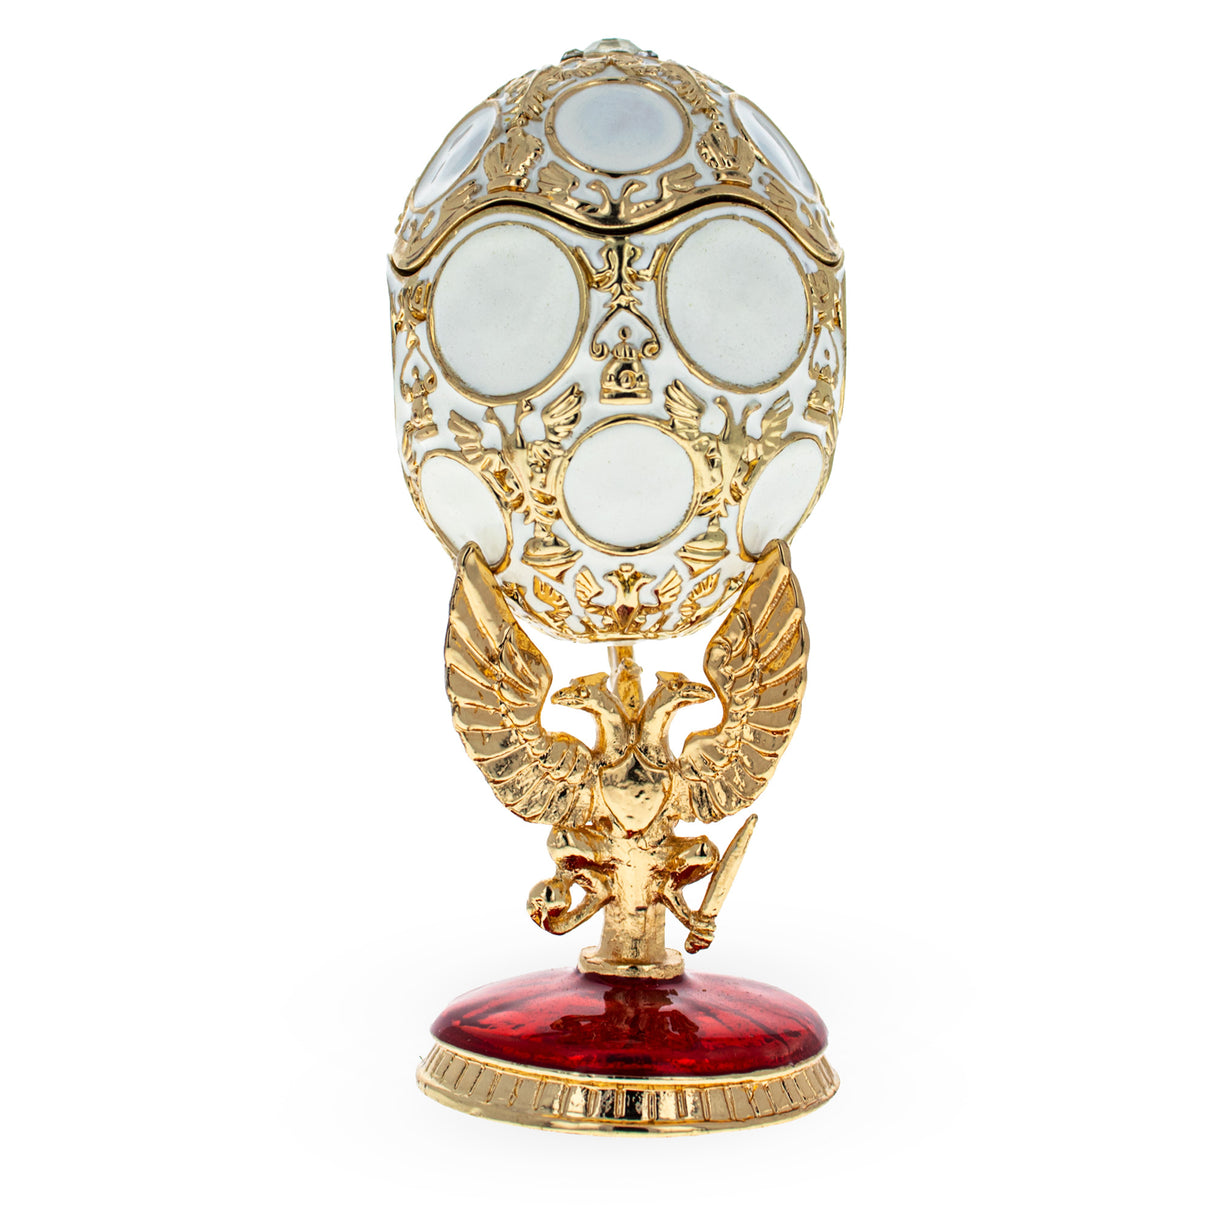 1913 Romanov Tercentenary Royal Easter Egg 3.6 Inches in Gold color, Oval shape